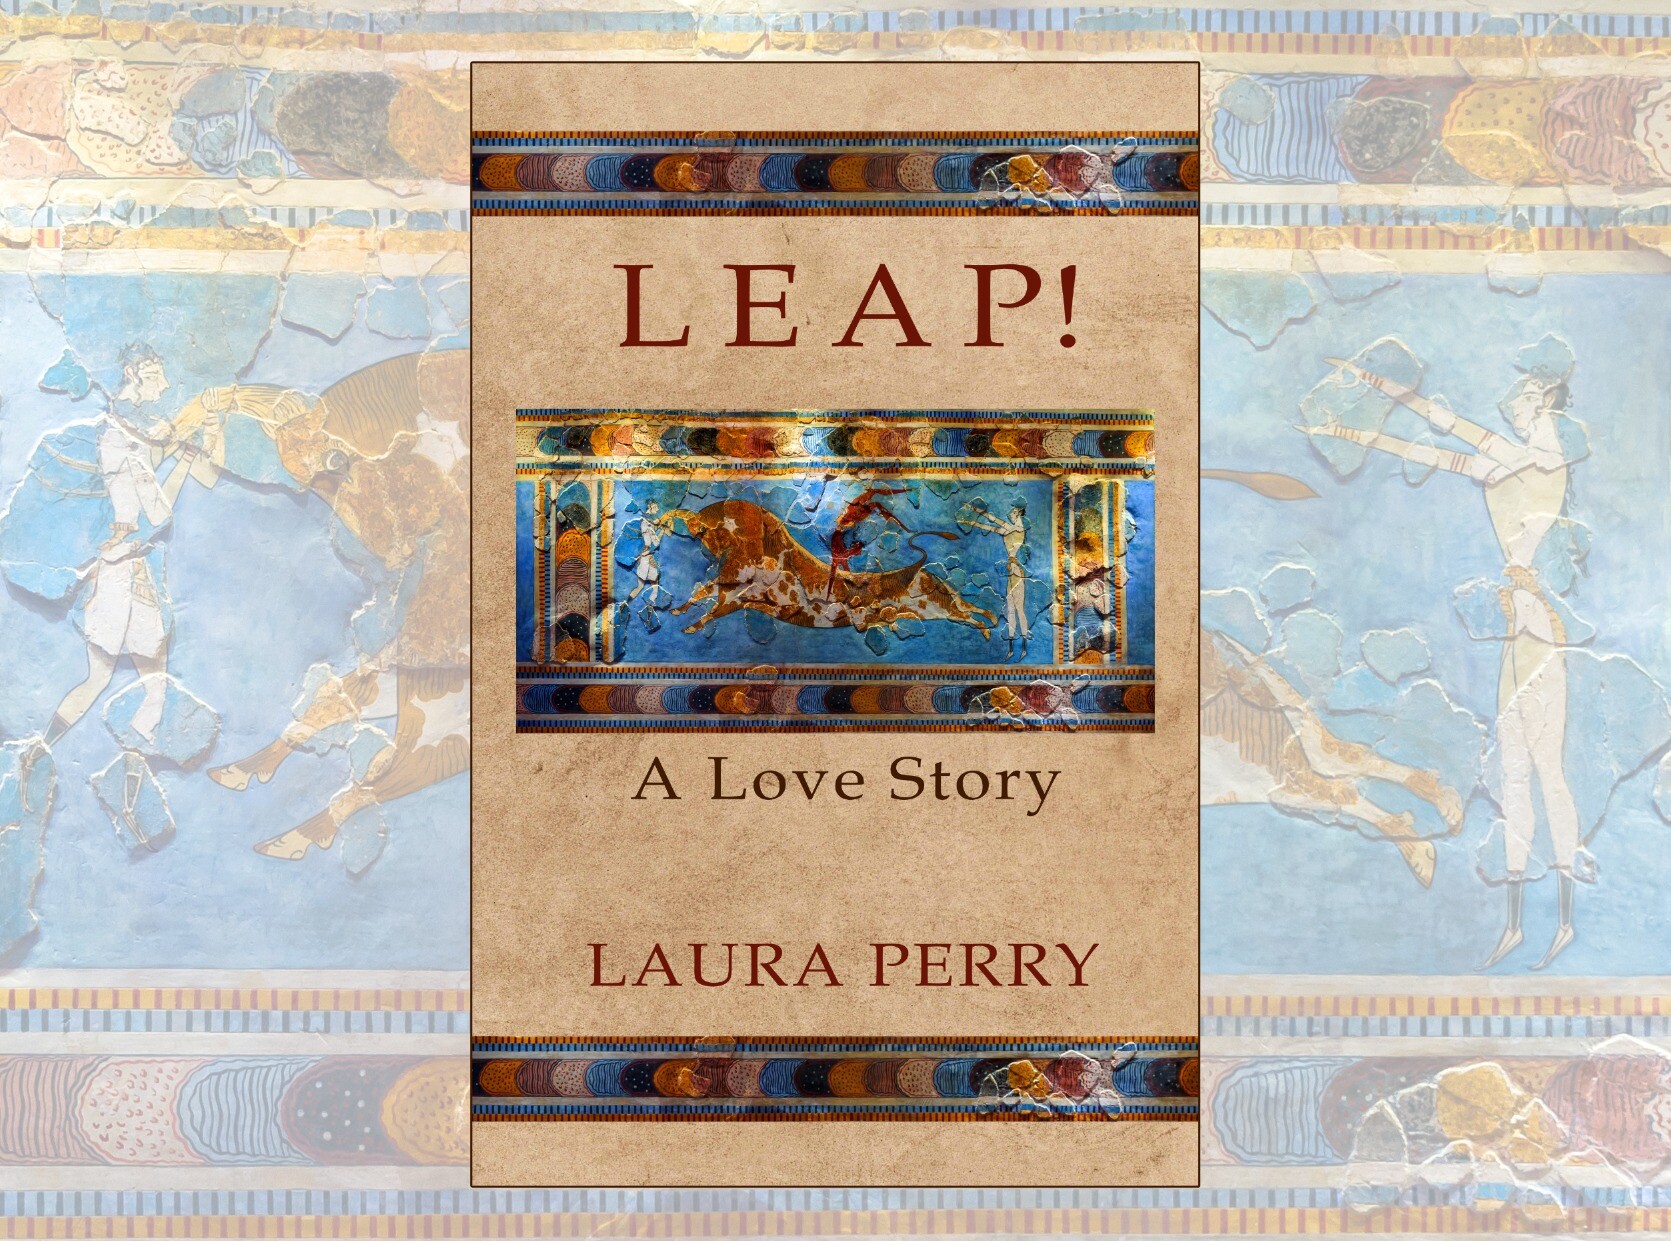 Book cover of Leap! A Love Story by Laura Perry with the Minoan Bull Leaper fresco in the background.